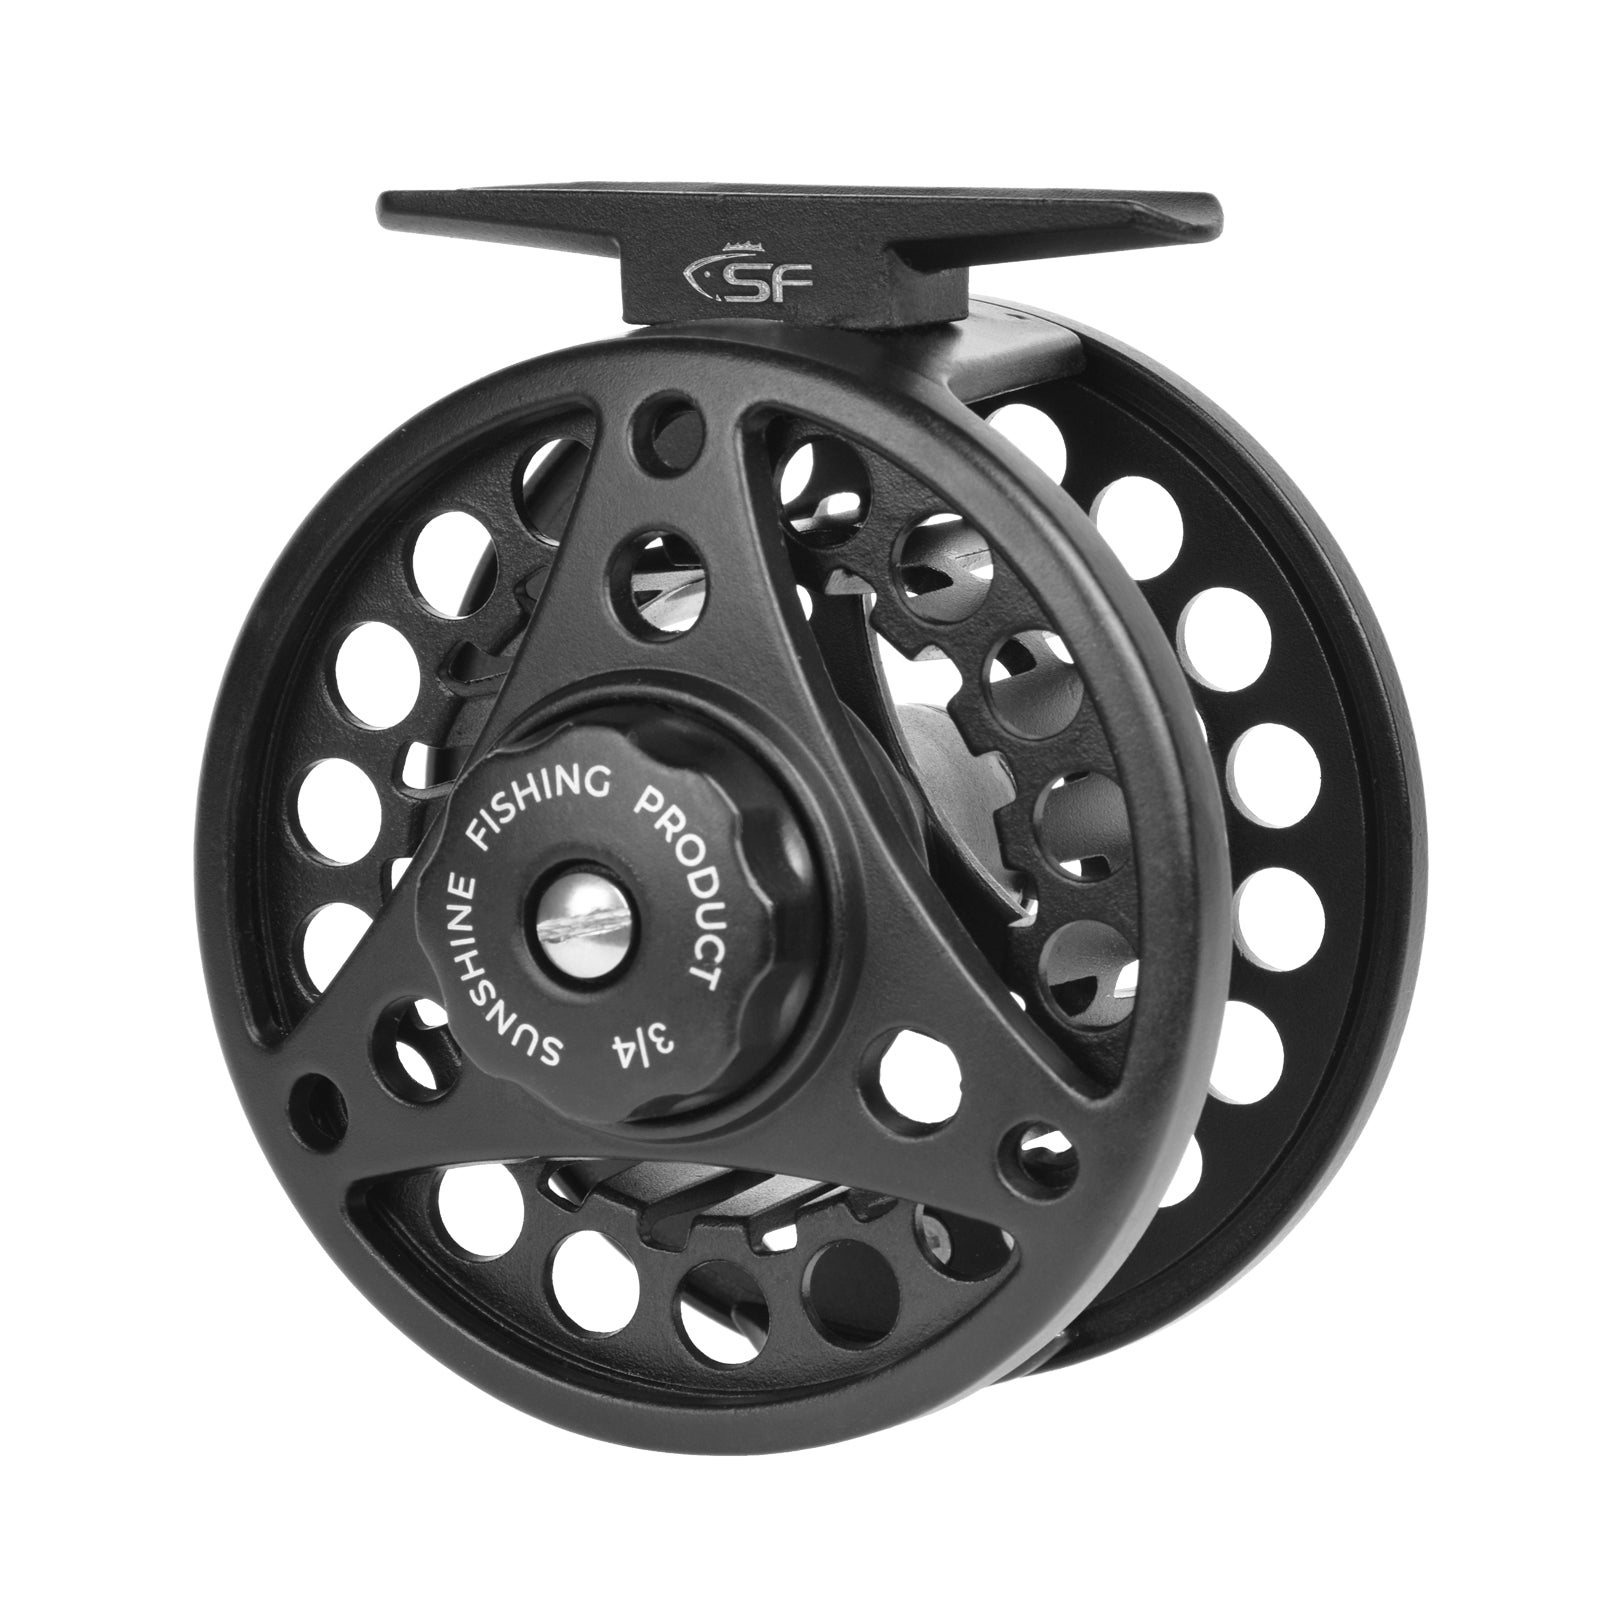 Fishing Reel Spinner Fly Fishing Reel Expert Fully Sealed CNC-machined  Aluminum Alloy Body Fishing Reel (Color : Diamond Black, Size : 9/11wt)